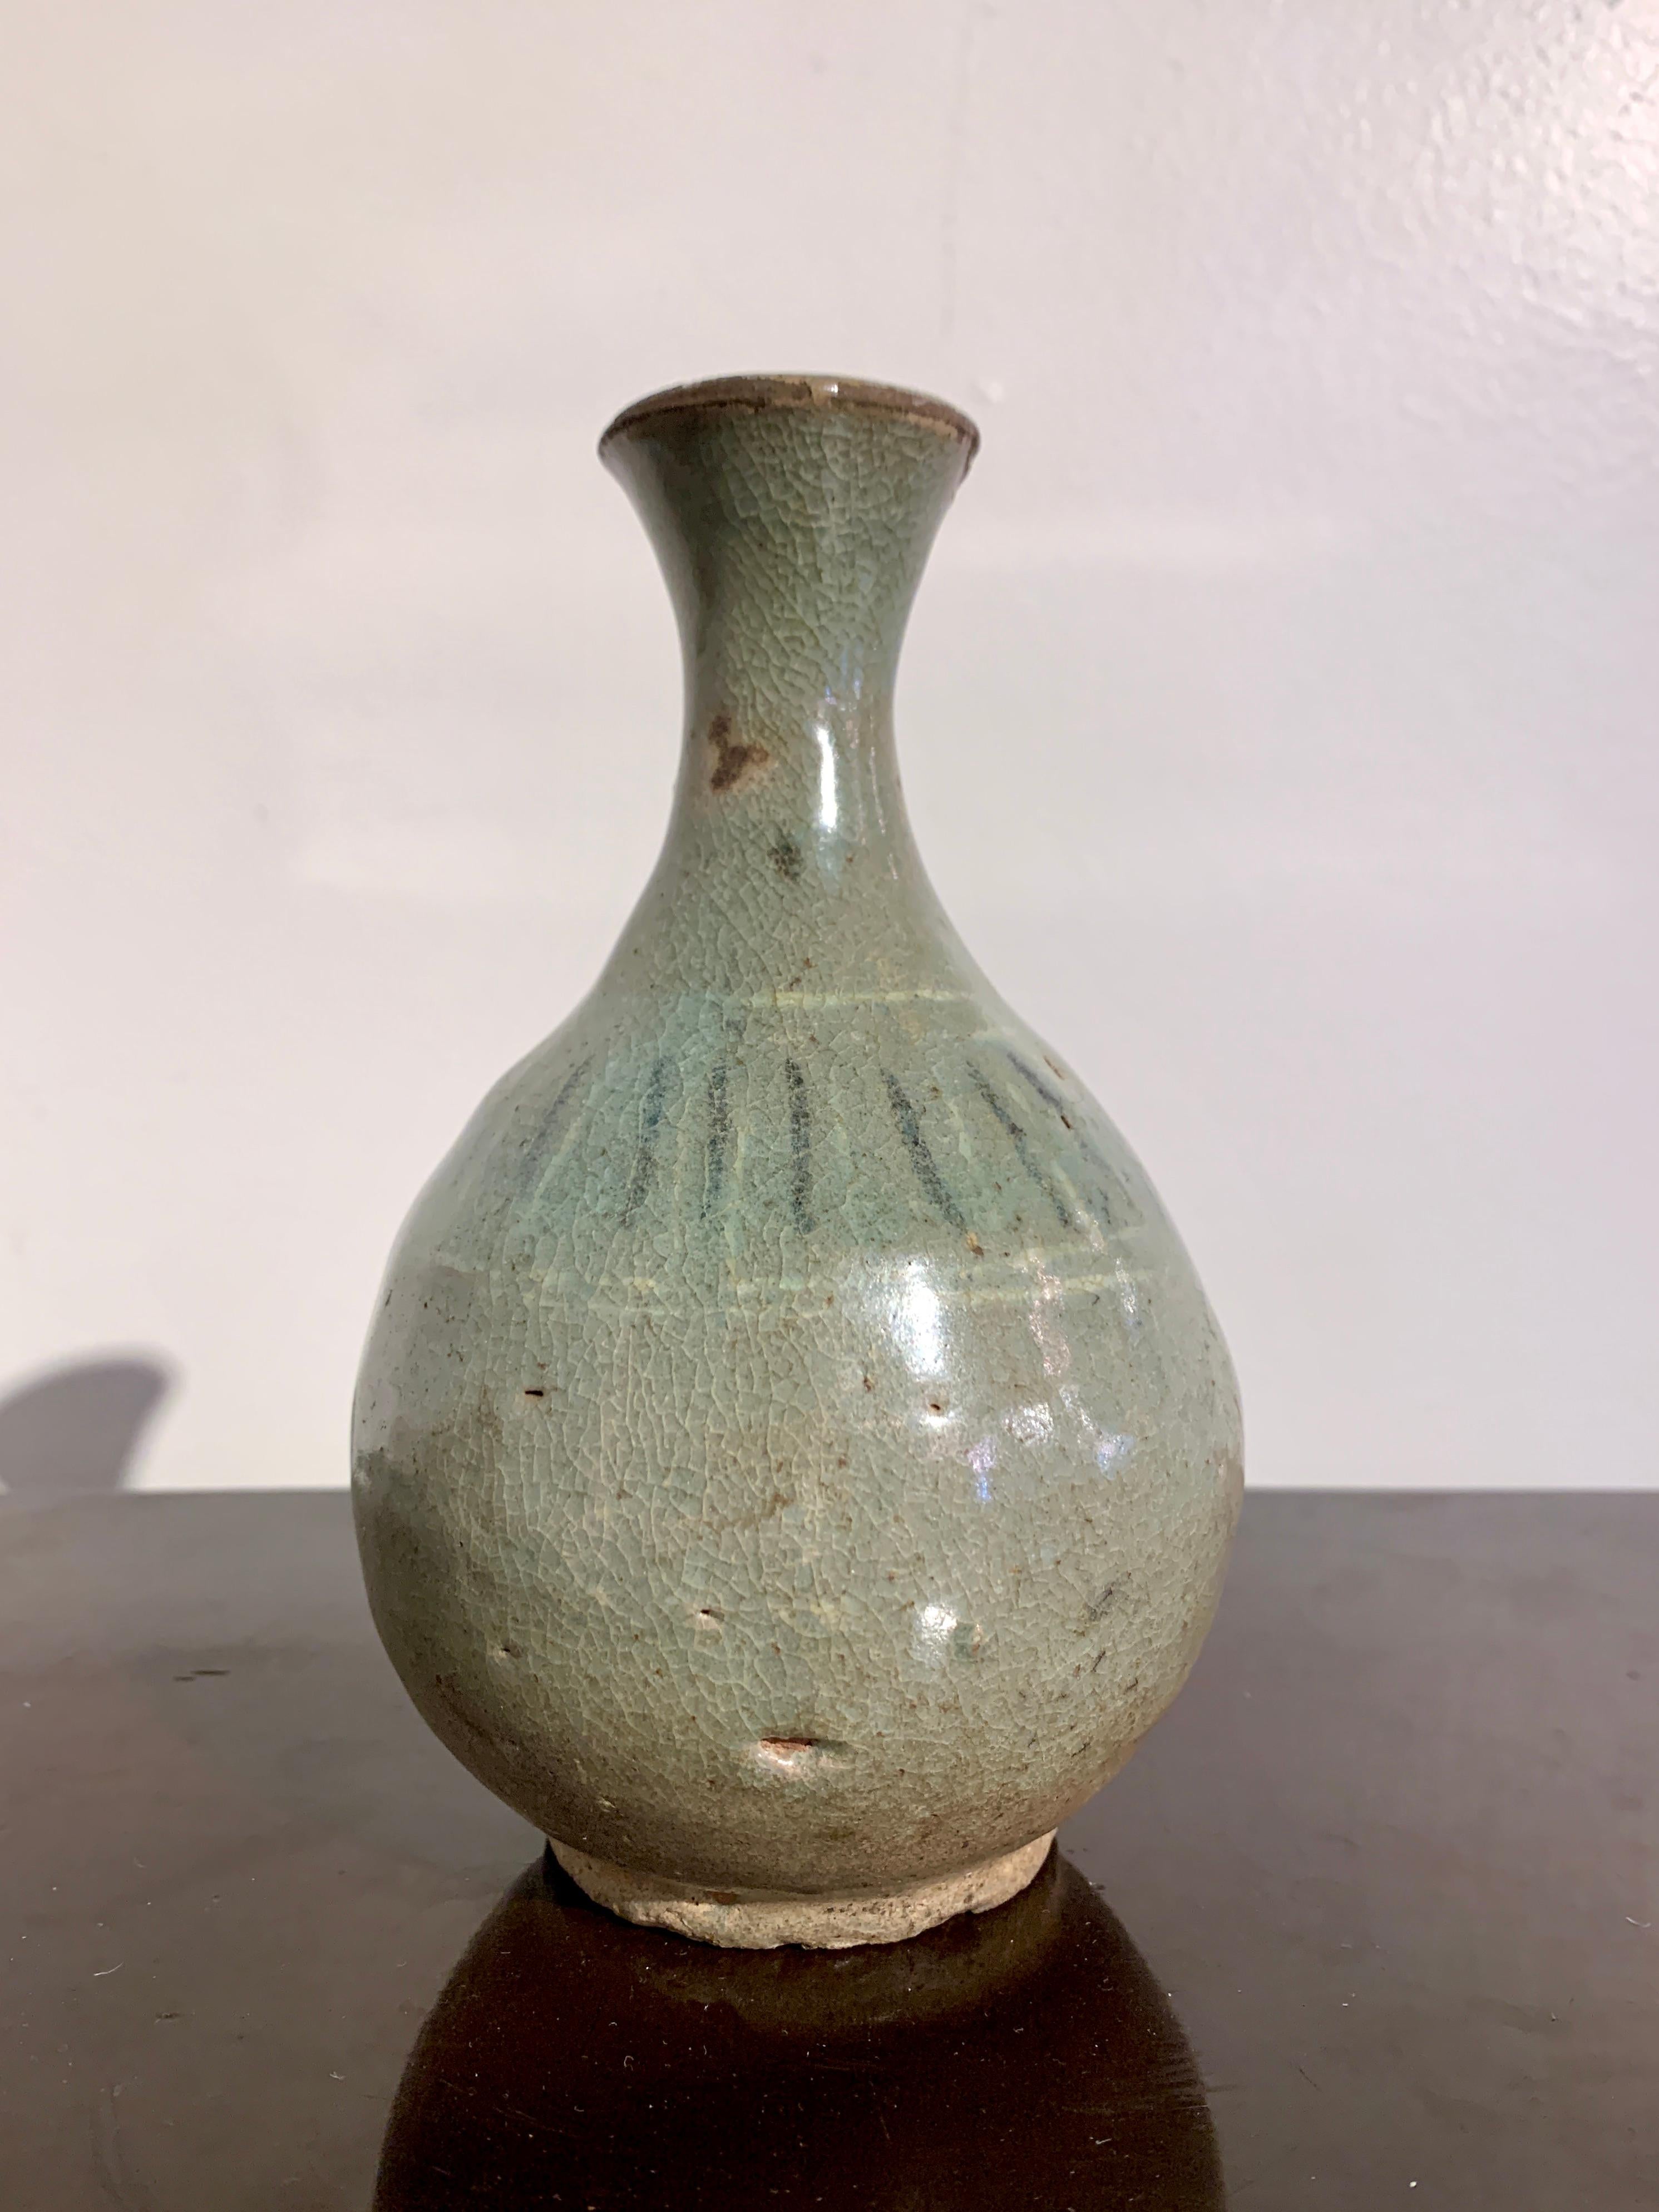 A lovely small Korean slip inlaid celadon glazed bottle vase, Goryeo Dynasty, 11th - 13th century, Korea.

The small vase heavily potted with a pear or teardrop shaped body, tall narrow neck, and everted mouth. The vase glazed all over in a blue